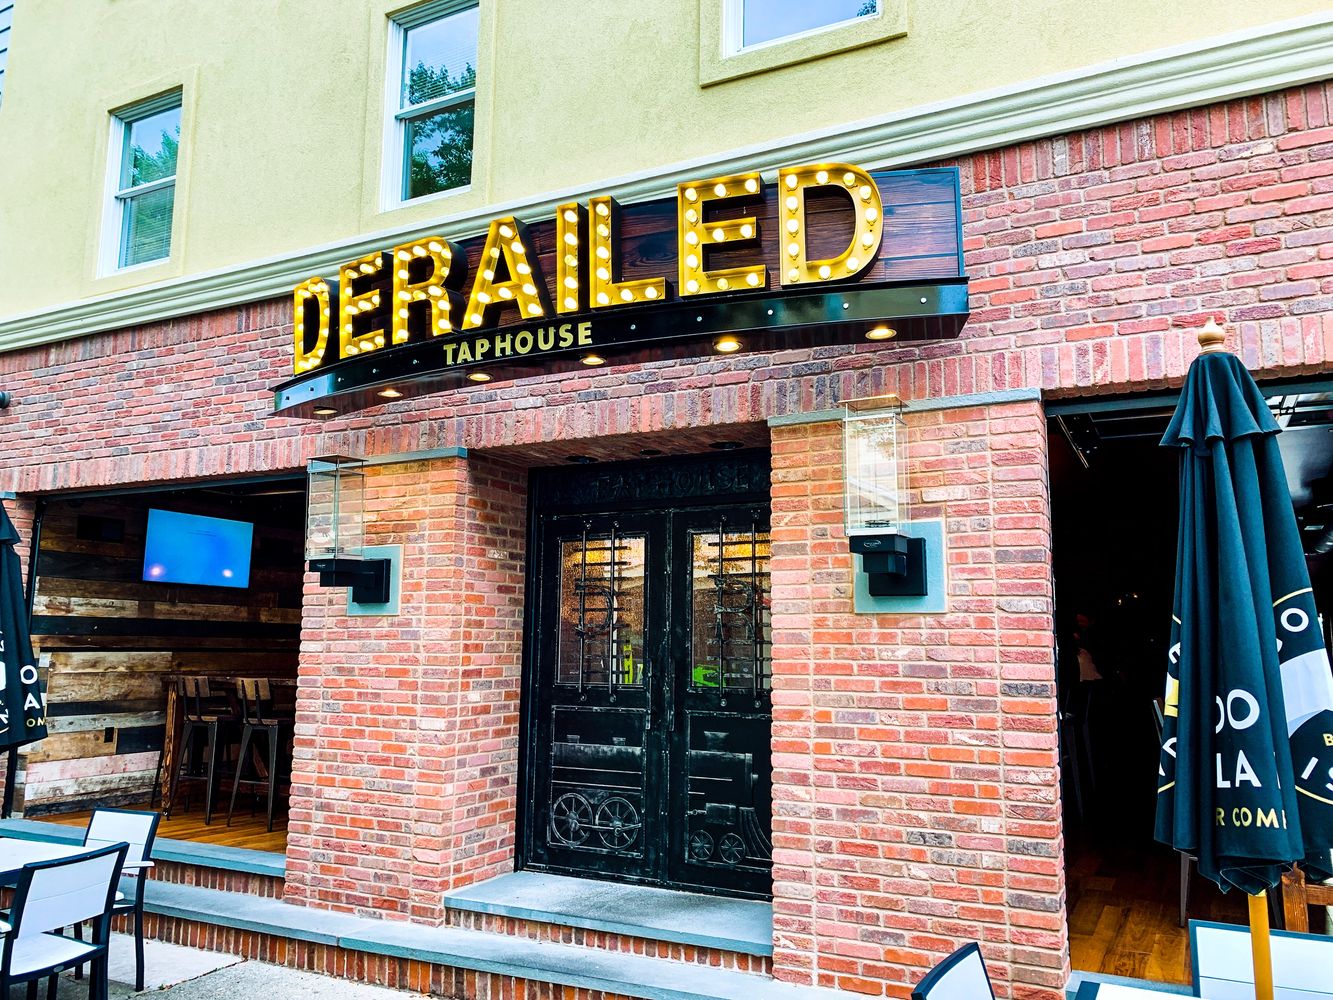 Derailed Taphouse bar and restaurant in Pocono mountains East Stroudsburg PA